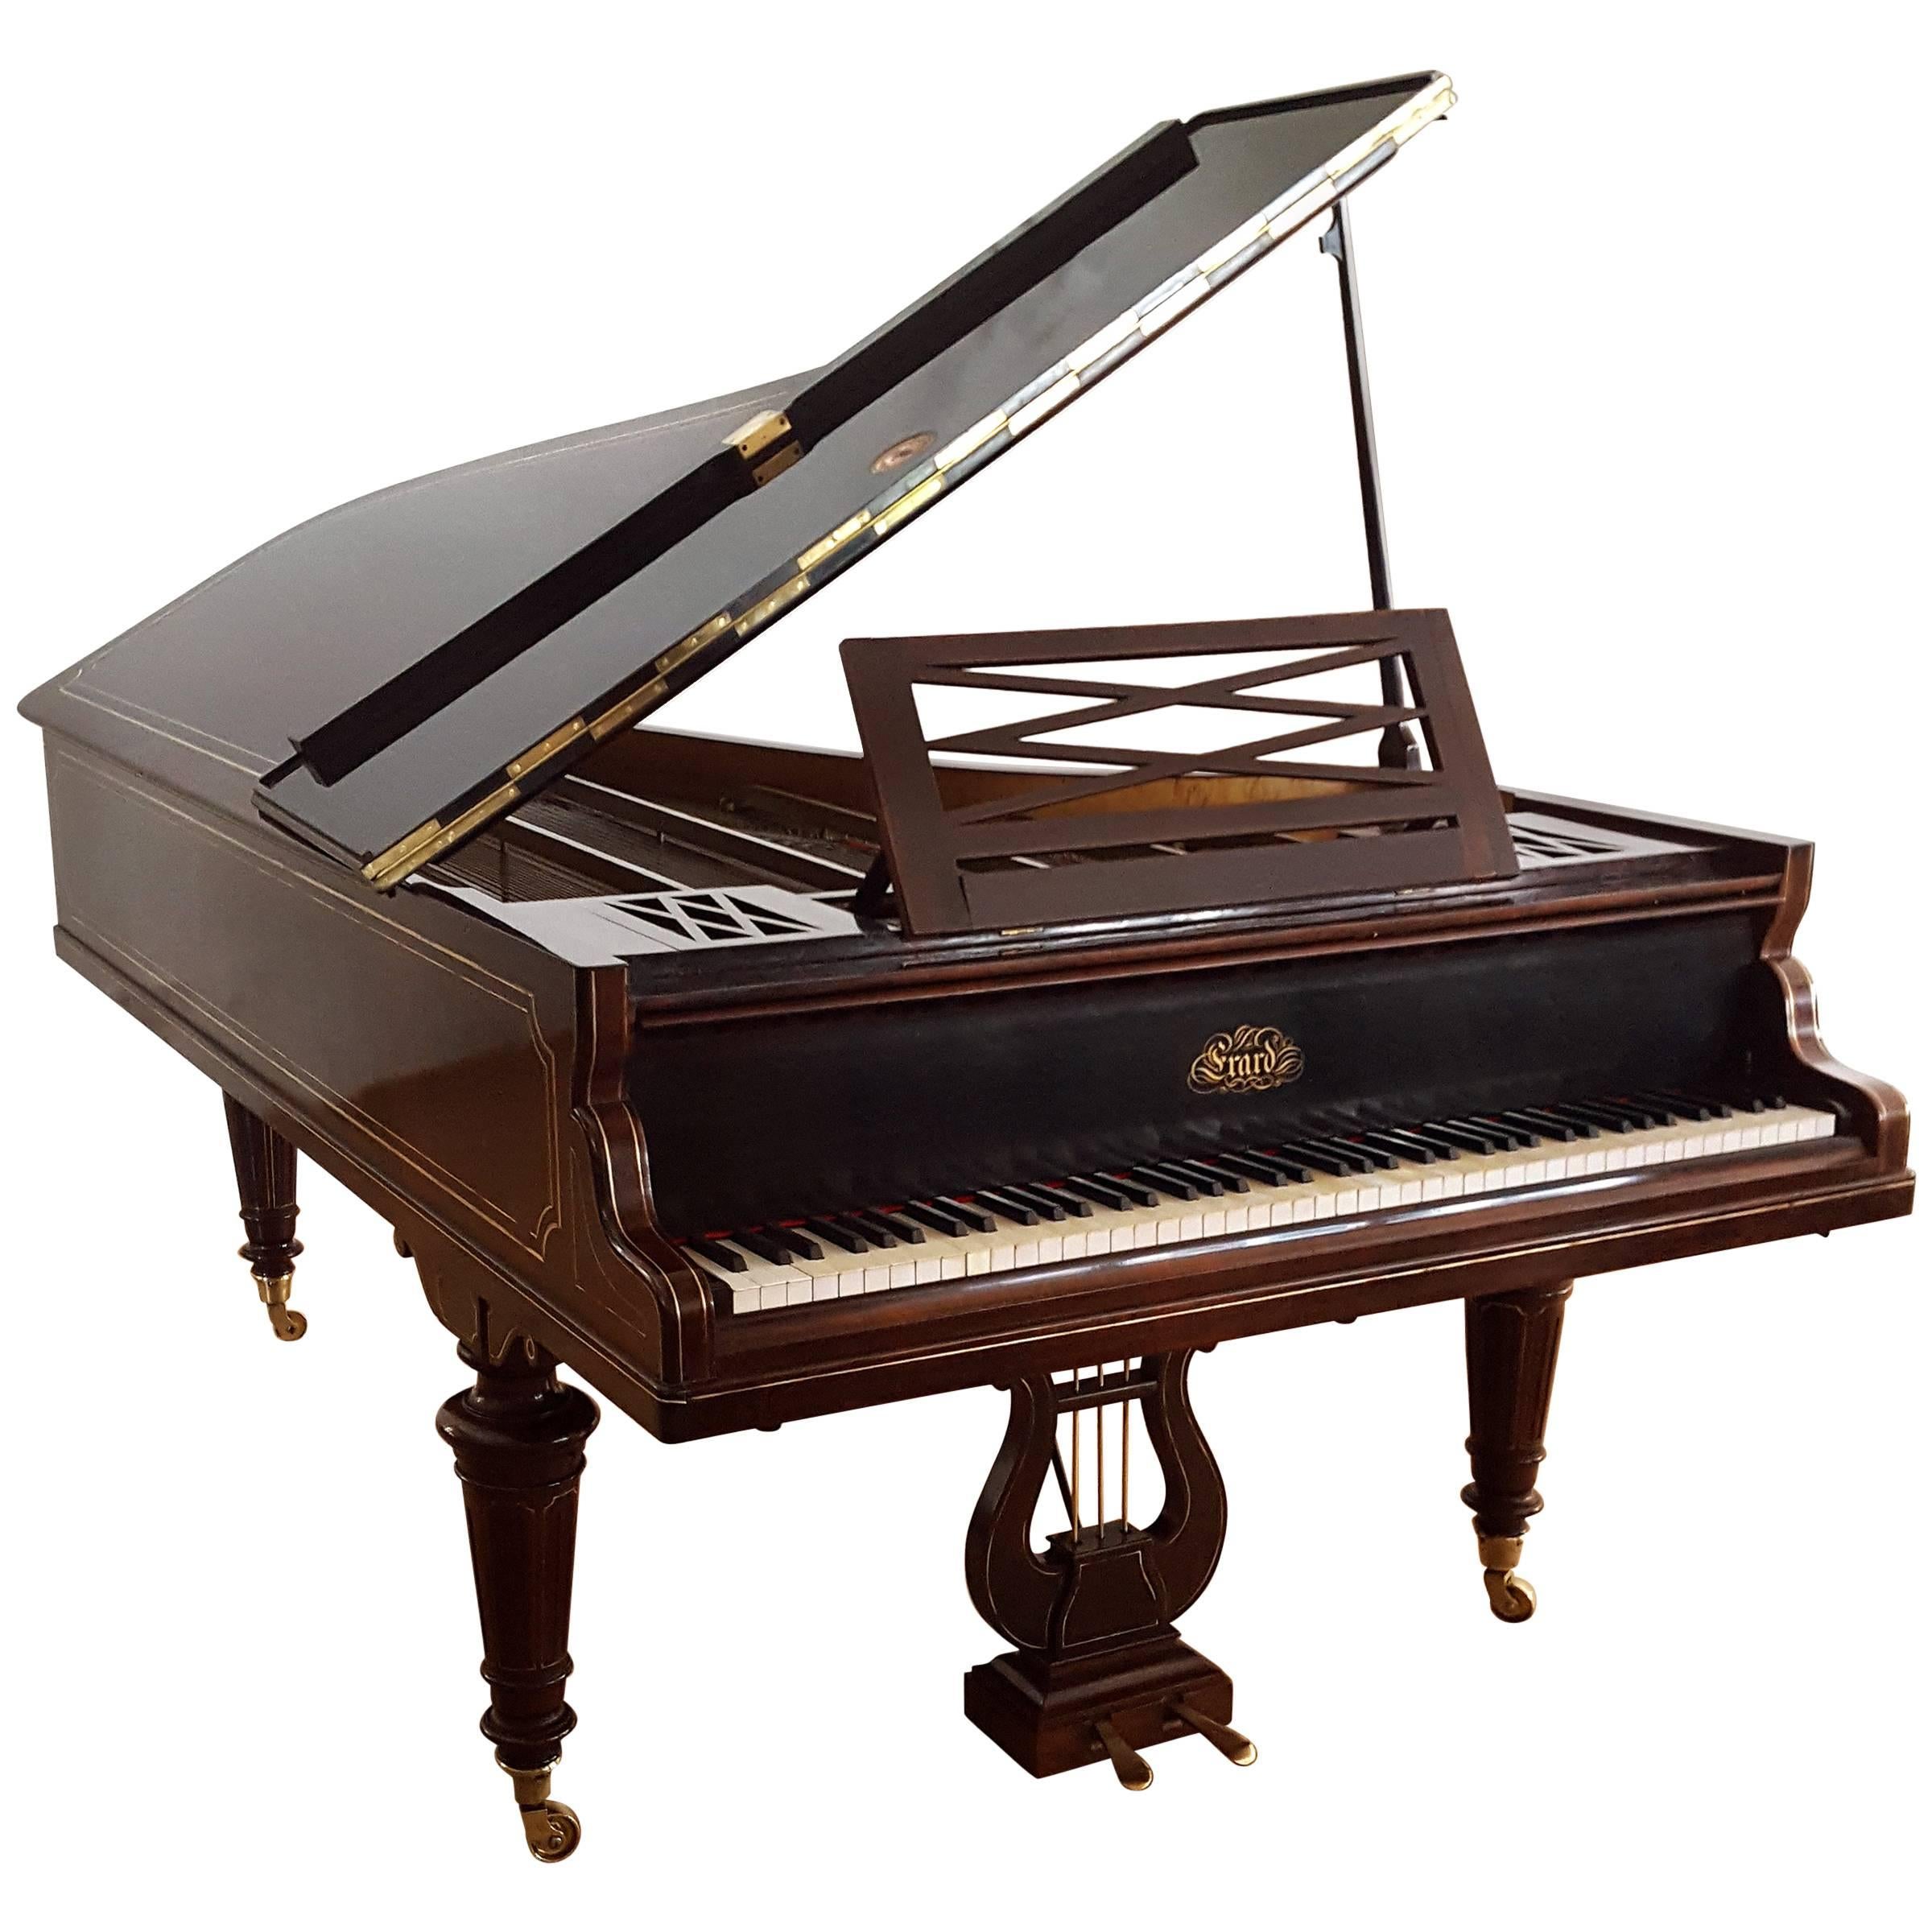 French Piano Erard, Rosewood Case Brass Inlays Carvings, Tchaikovsky Connection For Sale